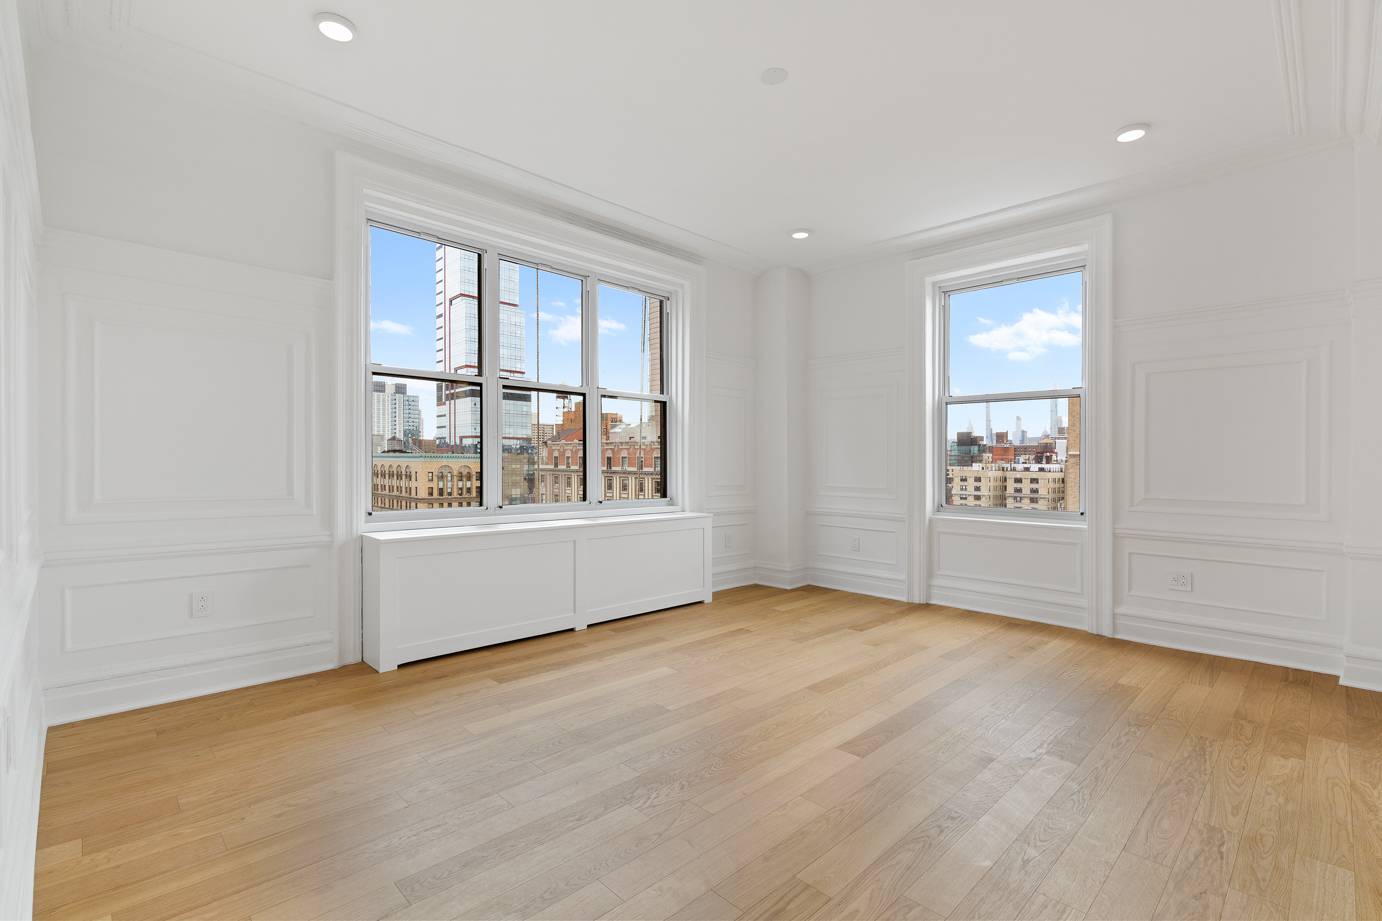 SPACIOUS 3 BEDROOM APARTMENT IN BEAUTIFUL UPPER WEST SIDE BUILDING